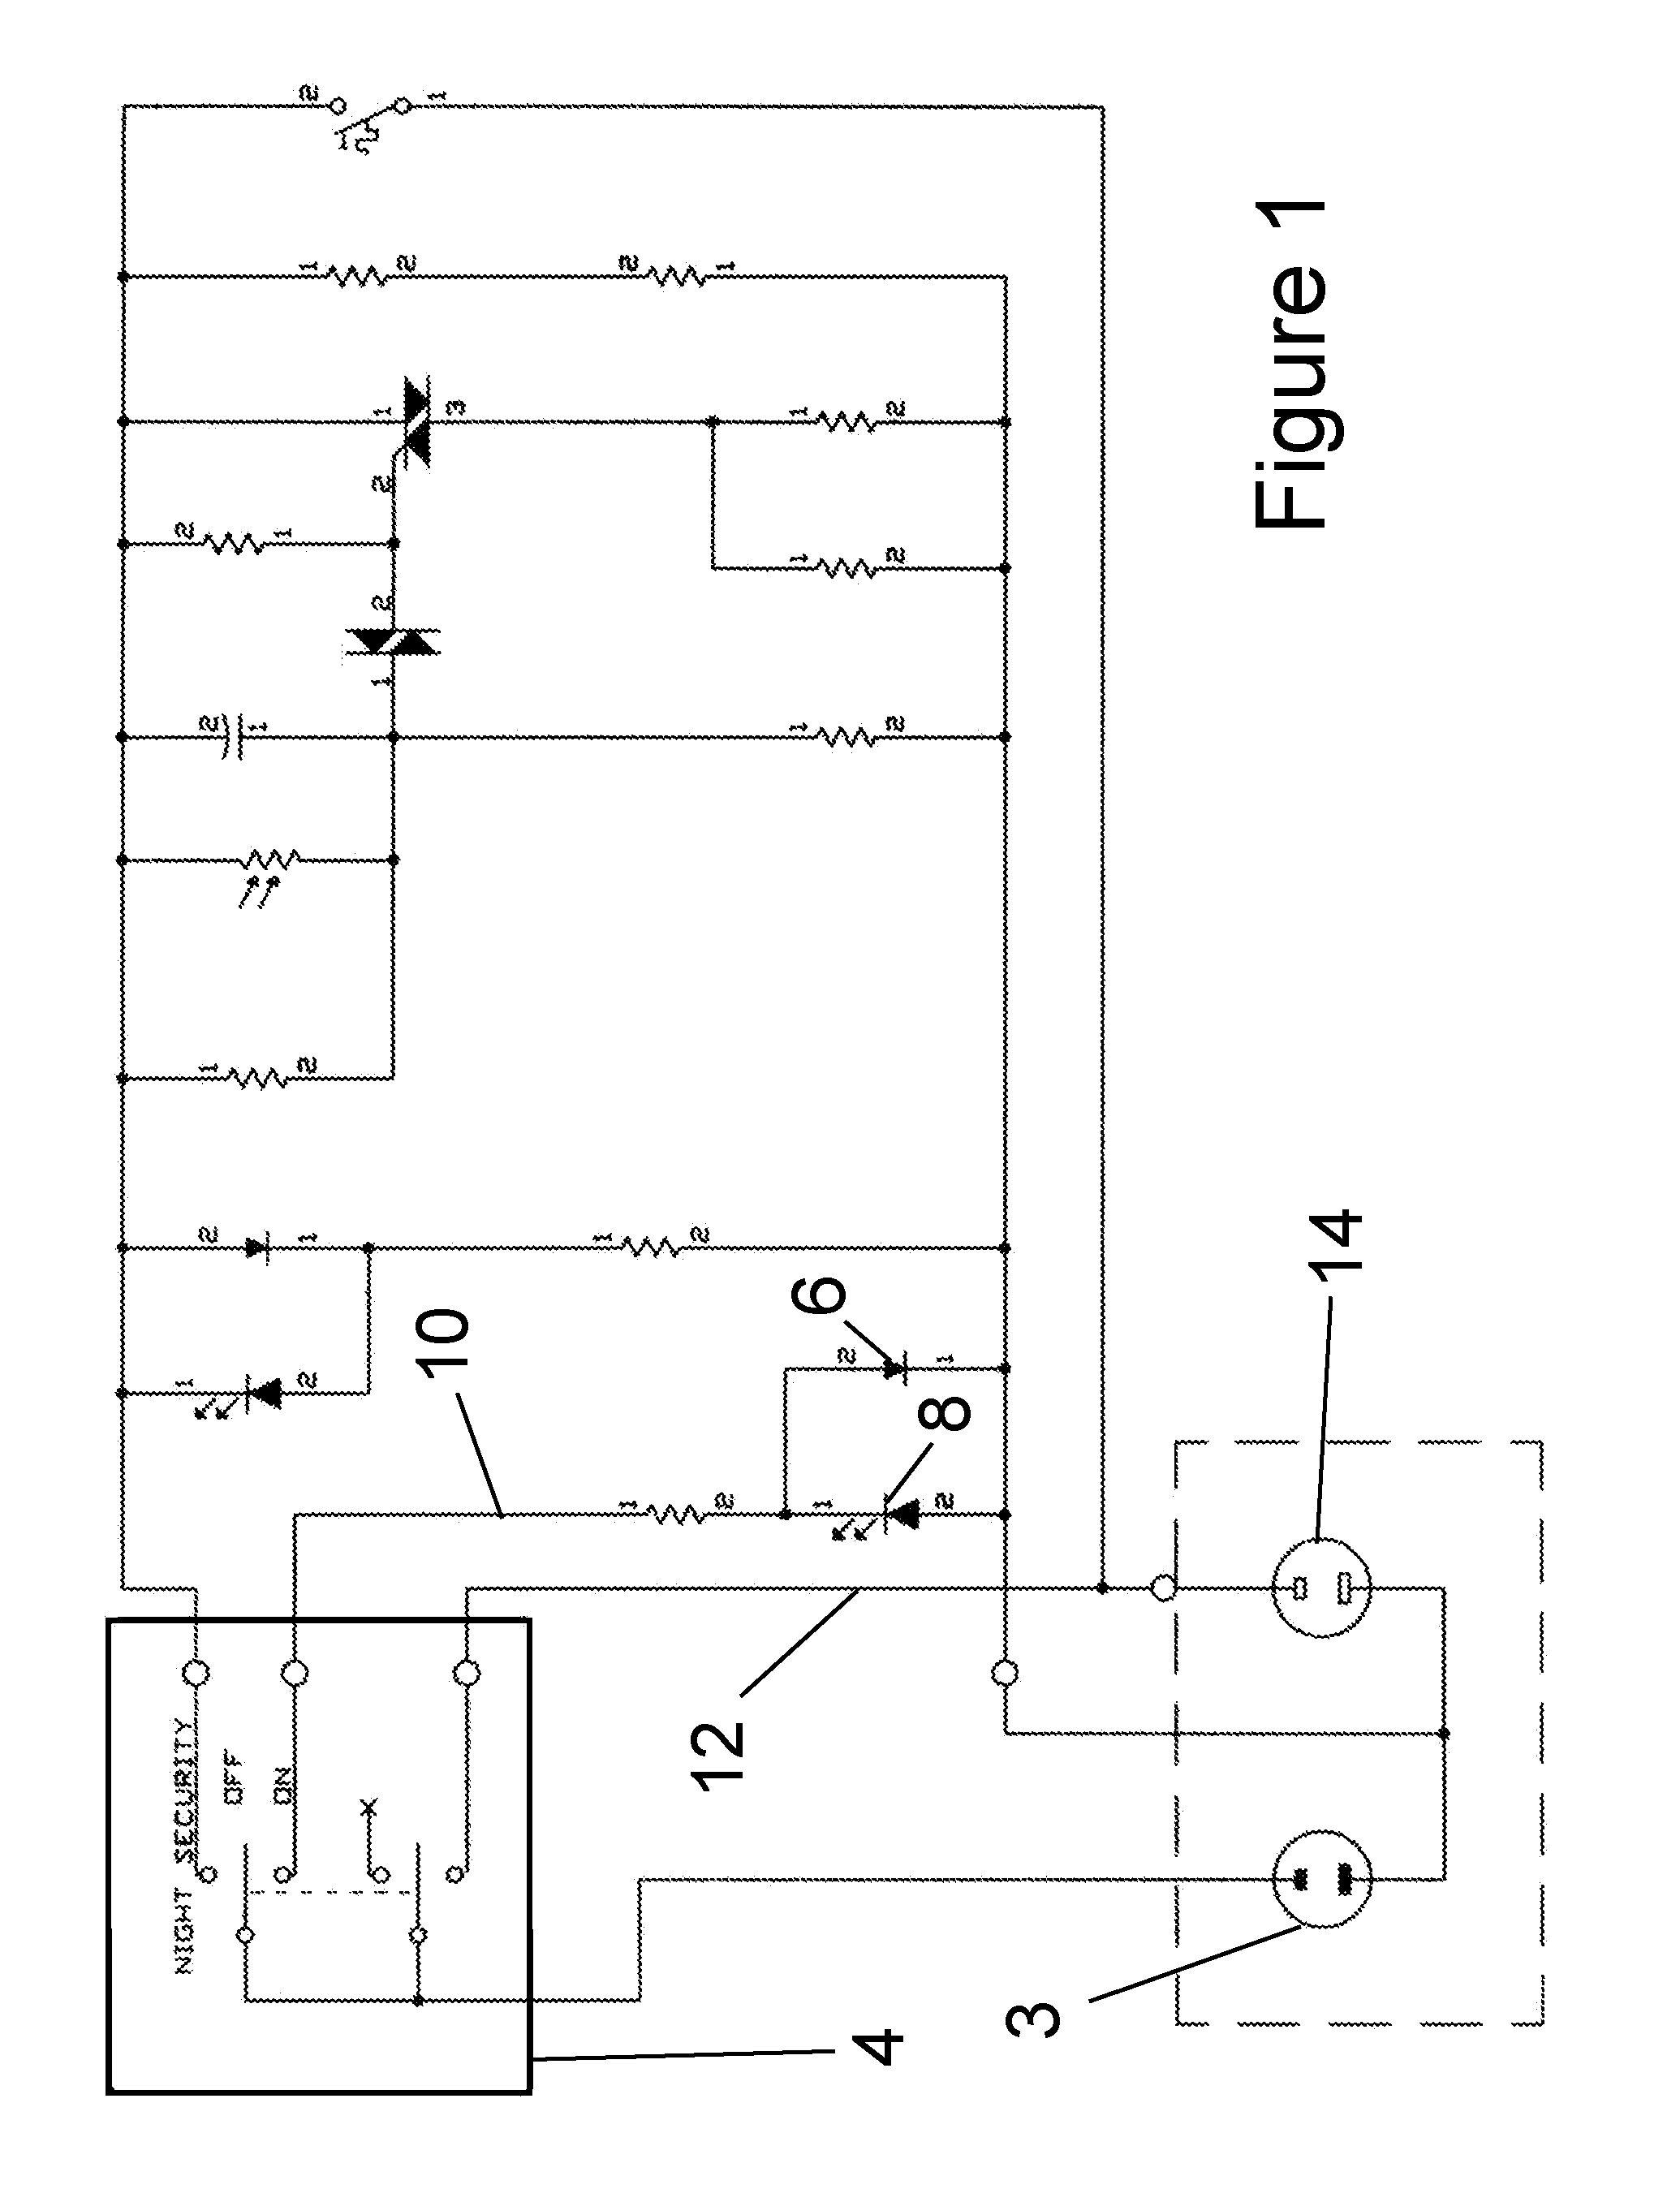 Device for Simulating Human Activity in an Unoccupied Dwelling